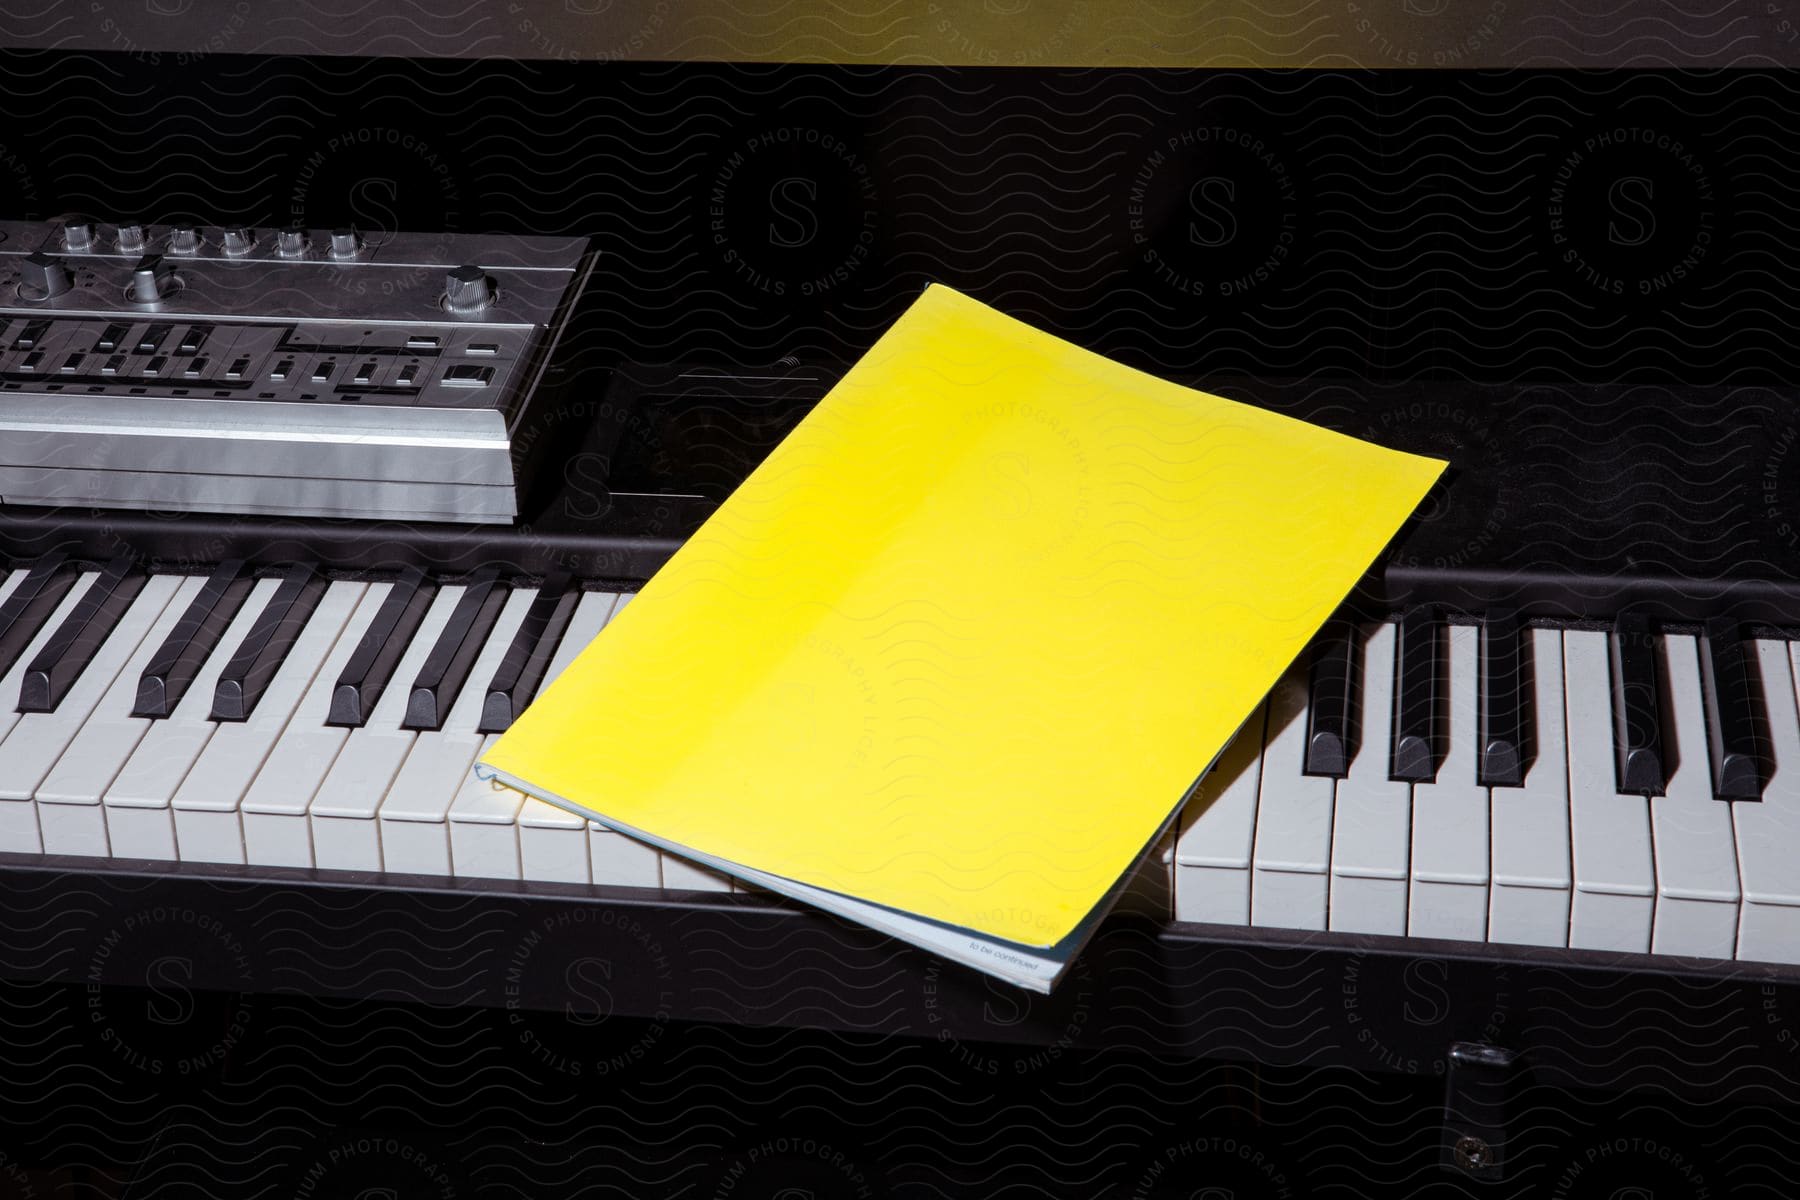 A bright yellow booklet is laying atop an electric piano in a darkened room.